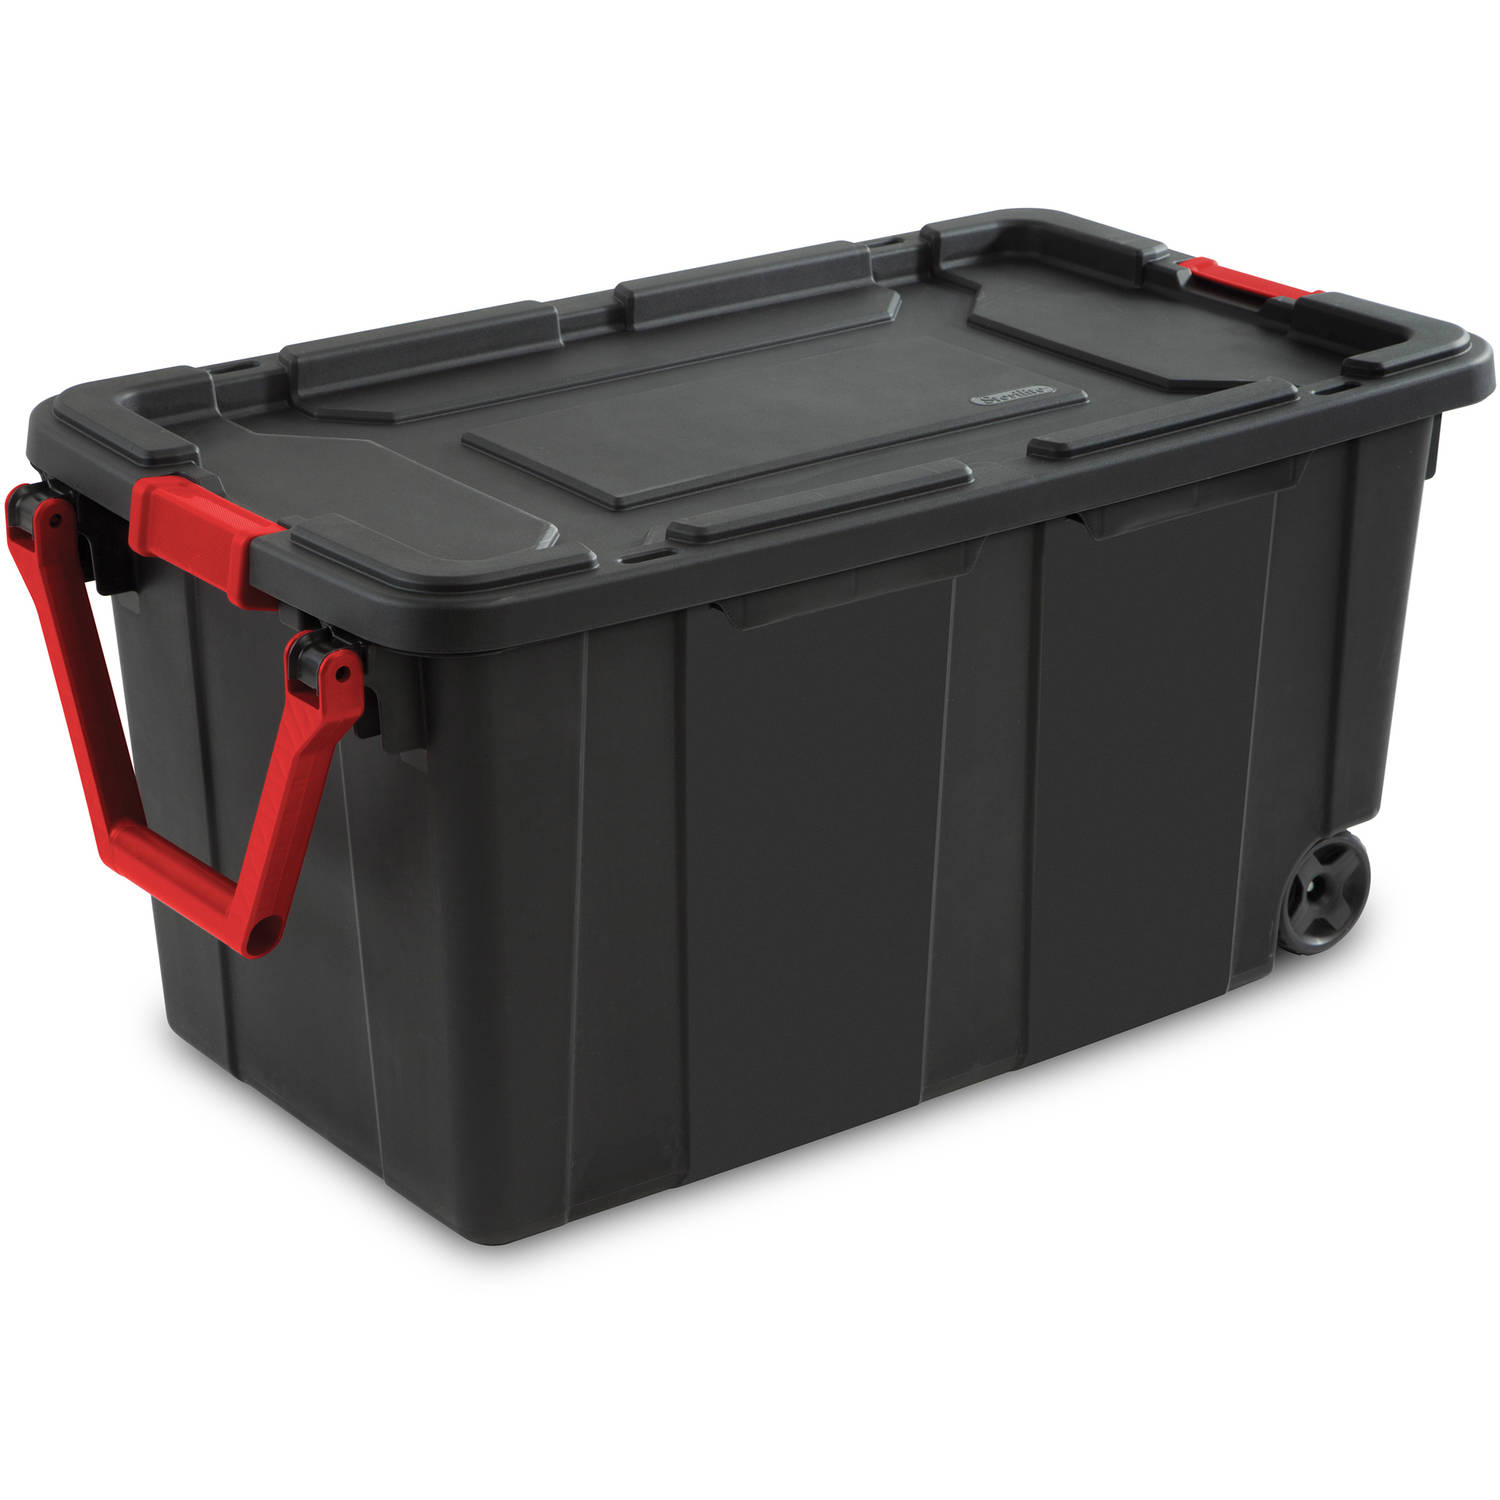 Sterilite 50 Gal189 L Stacker Tote Stadium Blue Case Of 3 throughout proportions 1500 X 1500